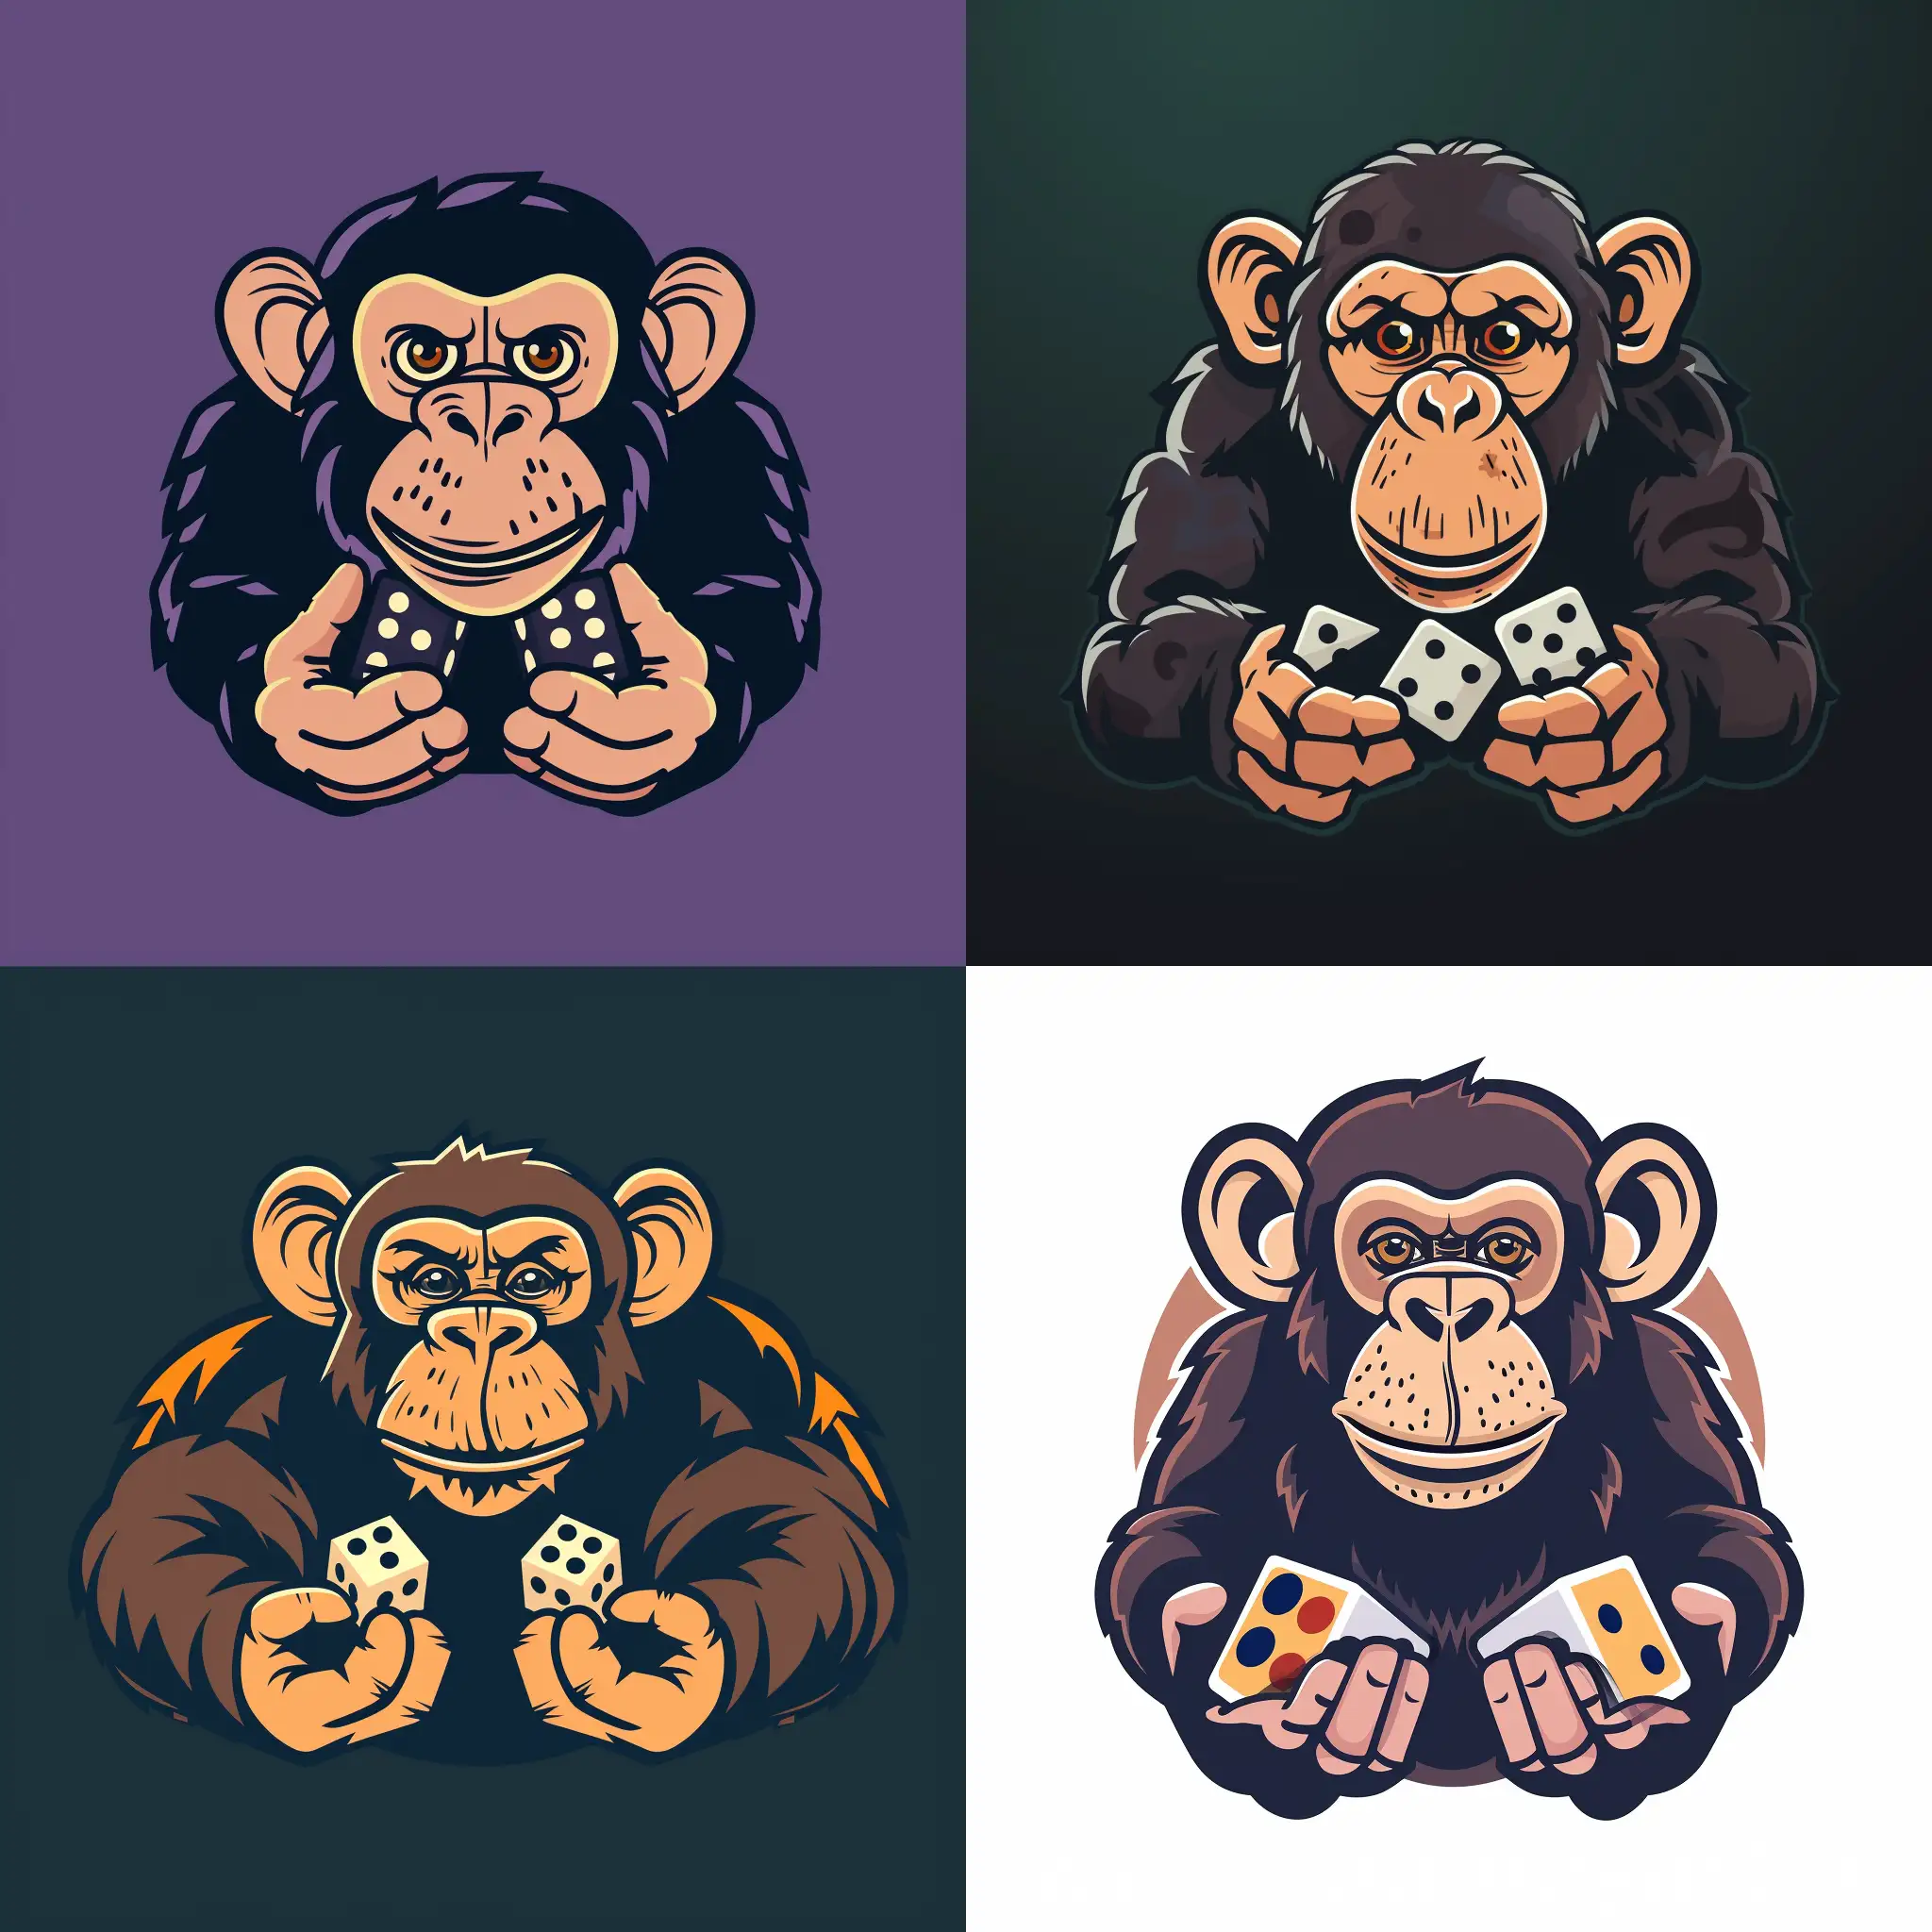 A monkey holds dice in his hands, an illustrative logo for a board game company, an icon